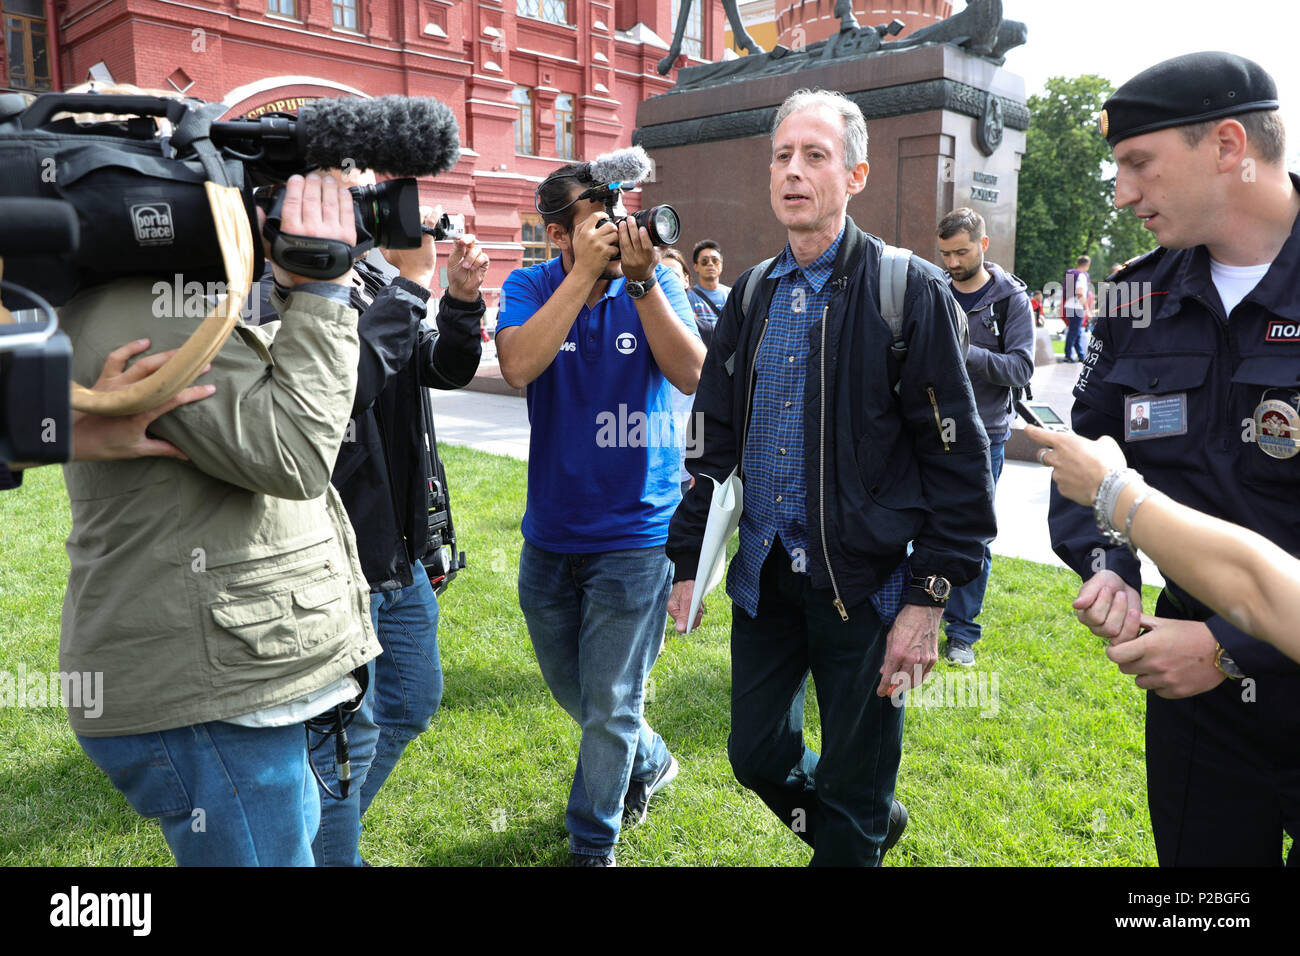 Gay rights campaigner Peter Tatchell is questioned and led away by Russian authorities in Moscow after staging a one-man protest near Red Square. Stock Photo